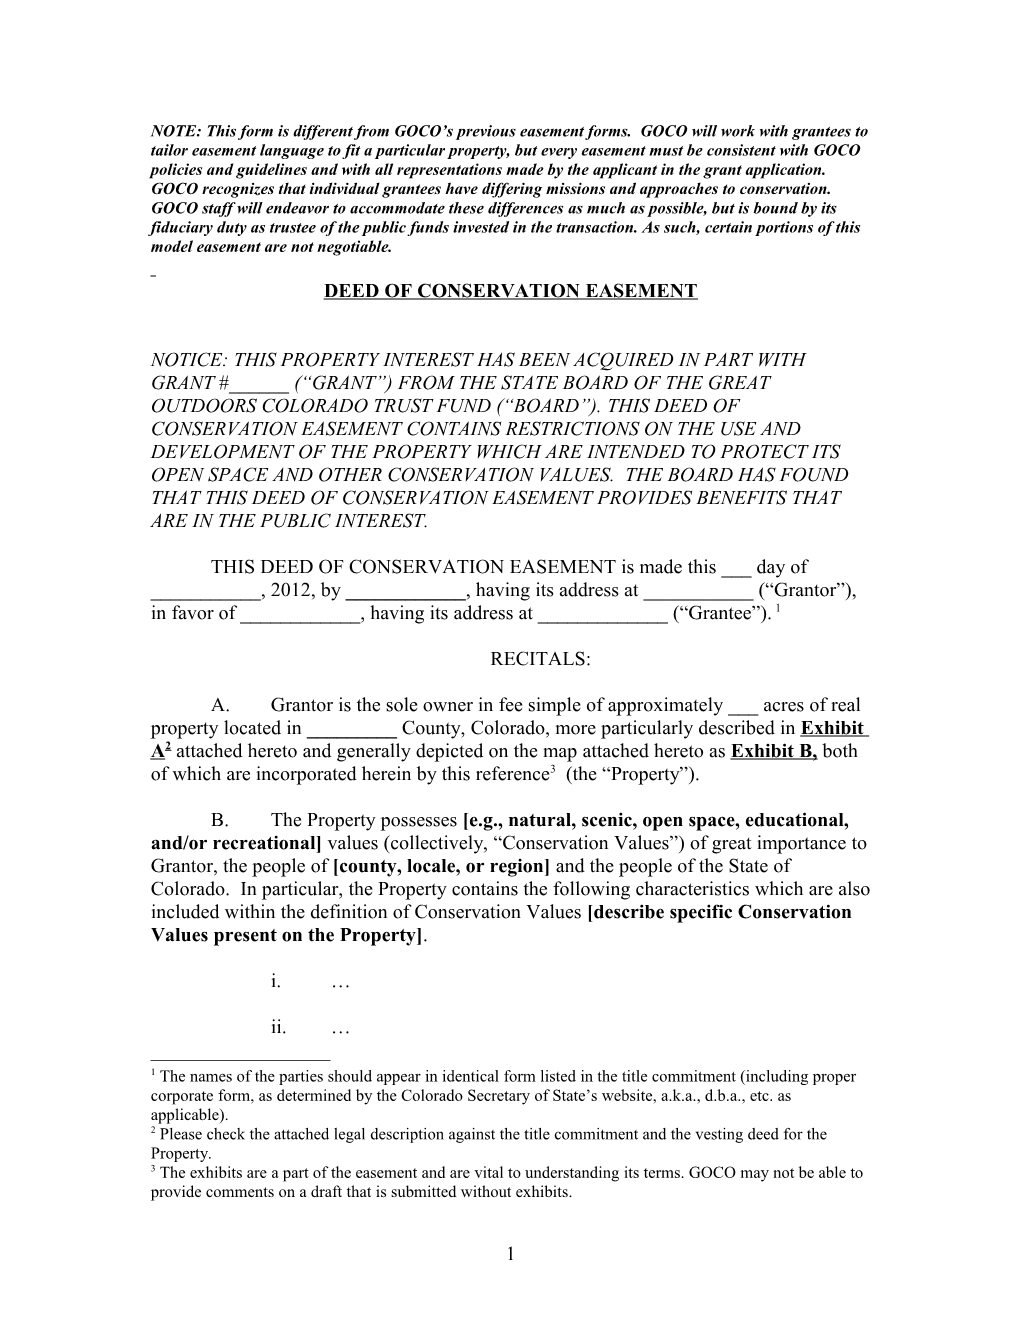 NOTE That This Form Looks Different from GOCO S Past Easement Forms